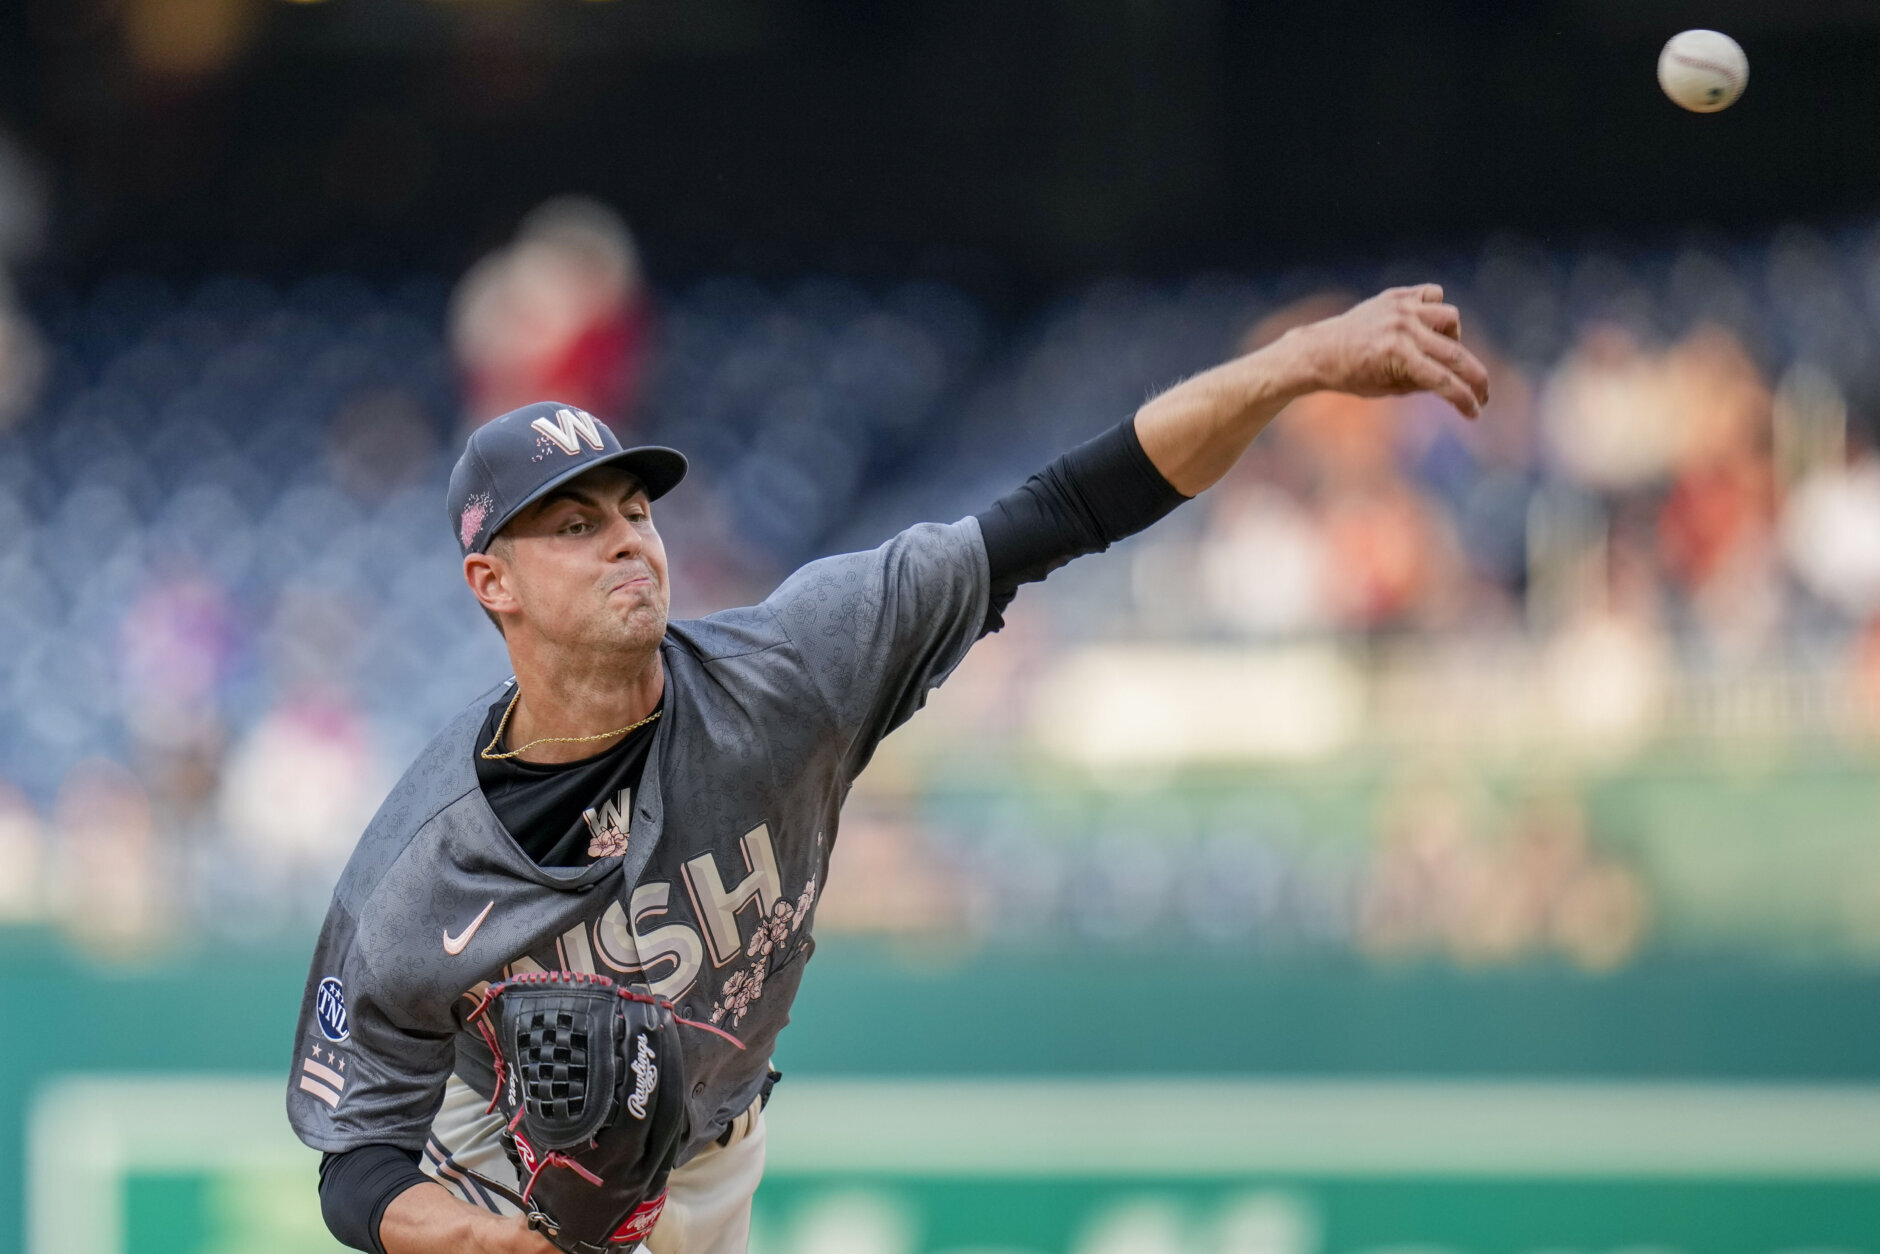 Washington Nationals starting pitcher MacKenzie Gore throws during the first inning of a baseball game against the New York Mets at Nationals Park, Friday, May 12, 2023, in Washington. (AP Photo/Alex Brandon)